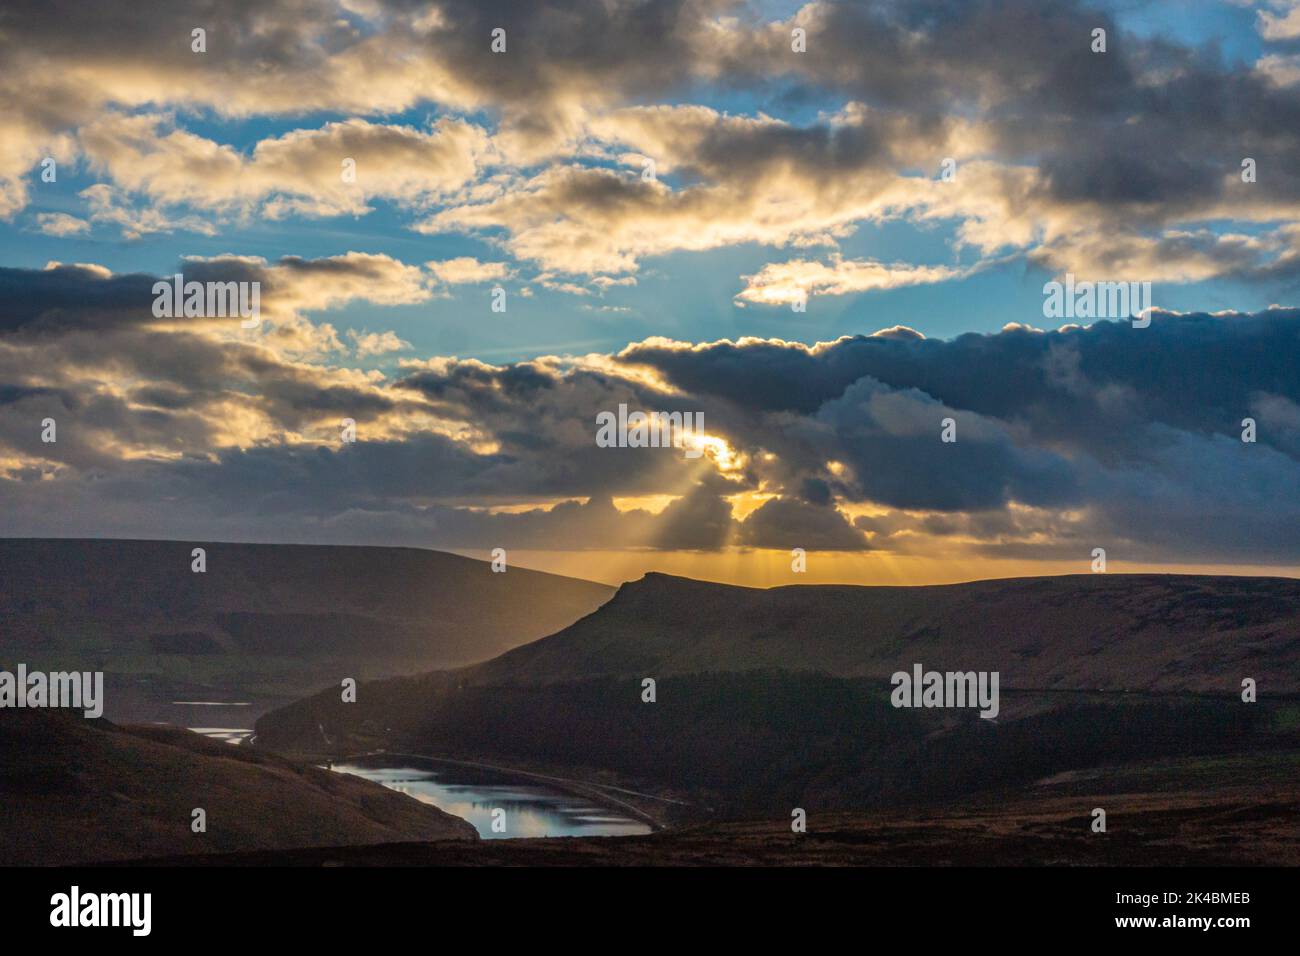 Police officers have searched this area for the remains of Keith Bennett on Saddleworth Moor. View from the A635 towards Dovestone reservoir Stock Photo